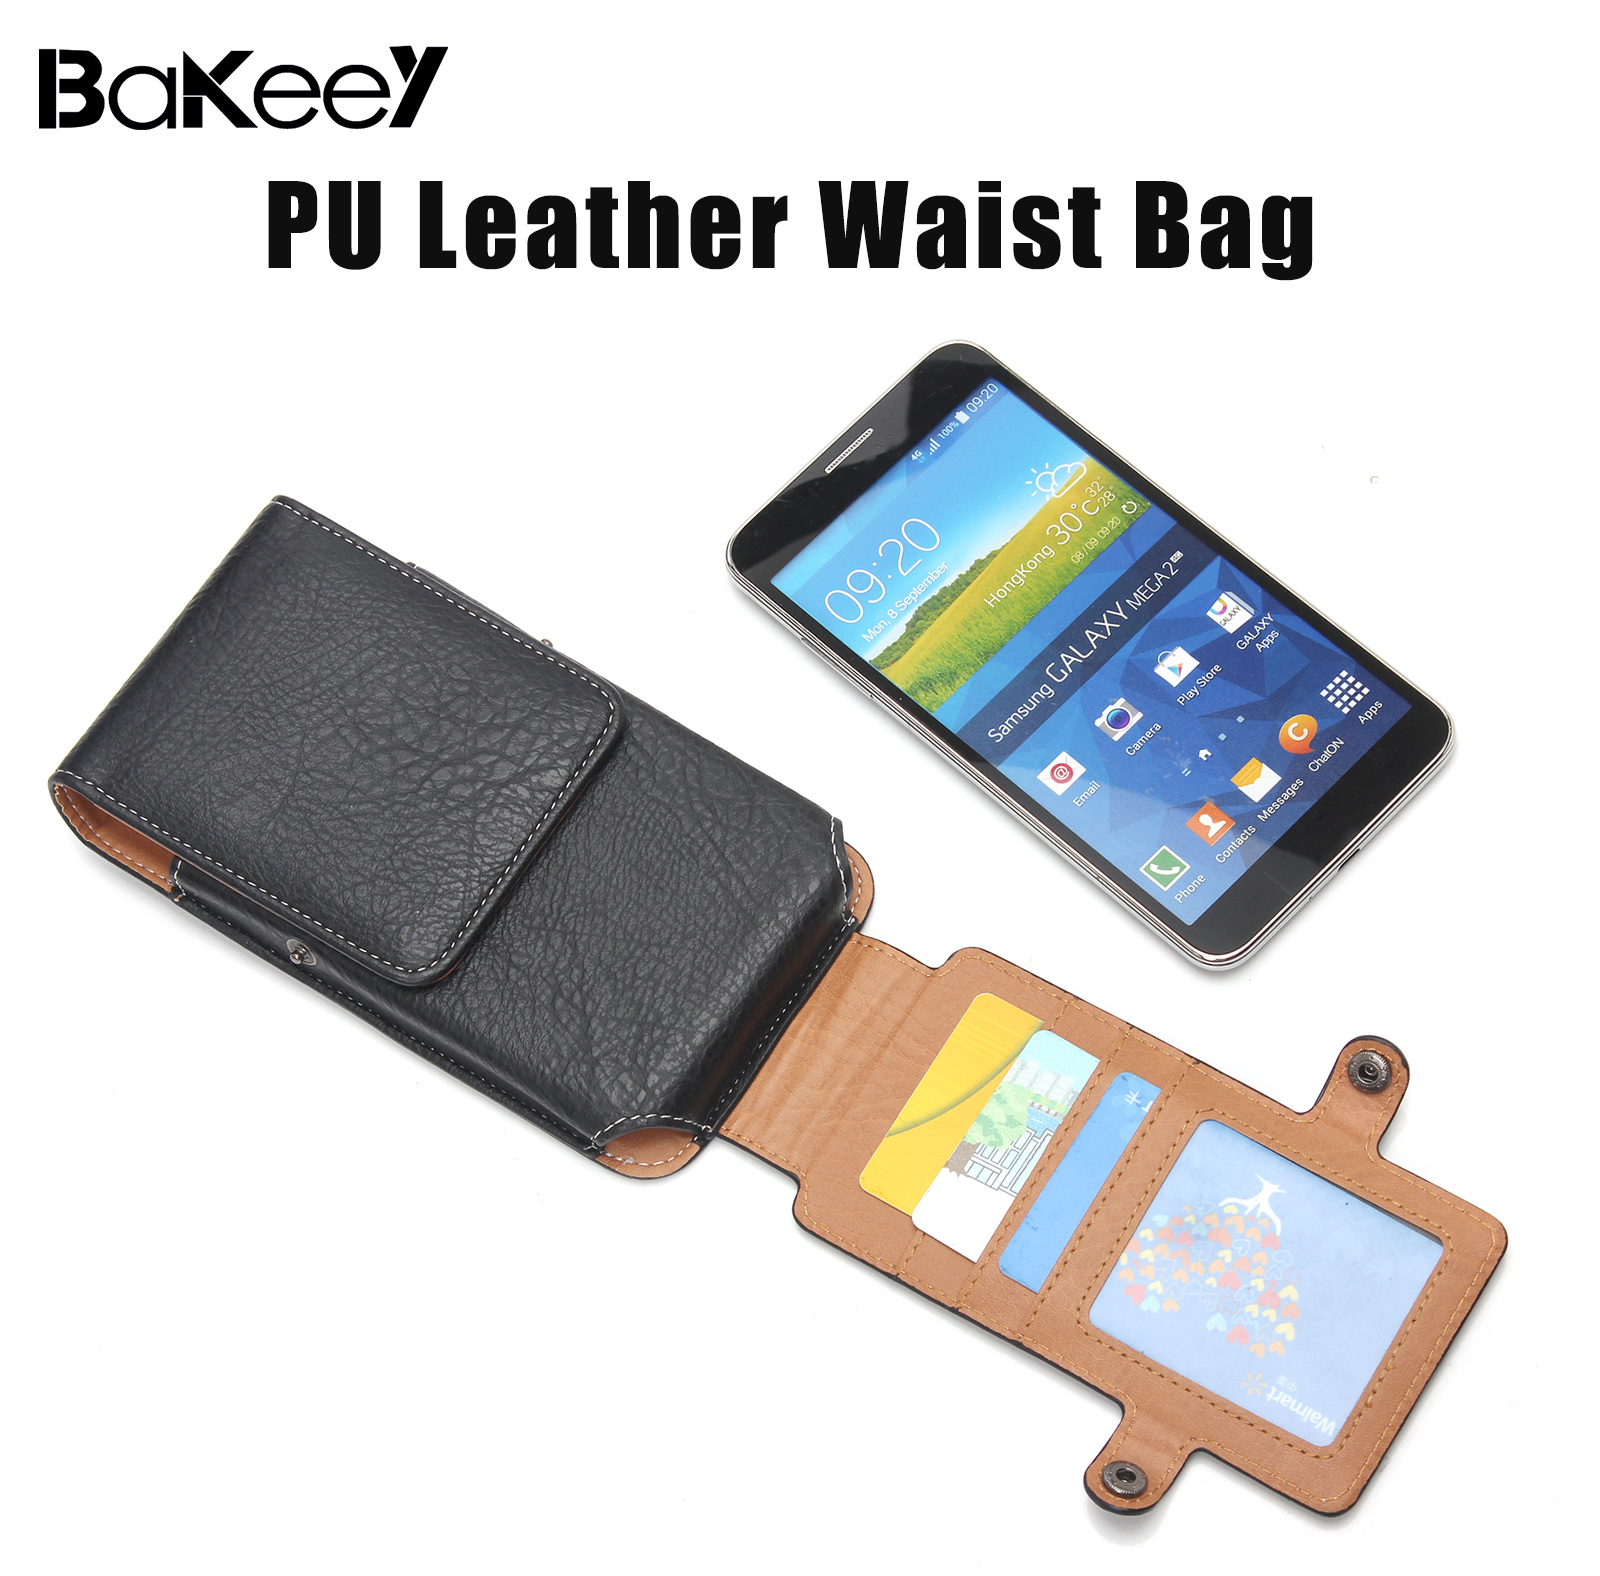 Bakeey-Casual-Vintage-Bussiness-64-inch-Vertical-Multi-Pocket-Multi-Card-Slot-PU-Leather-Mobile-Phon-1692765-1